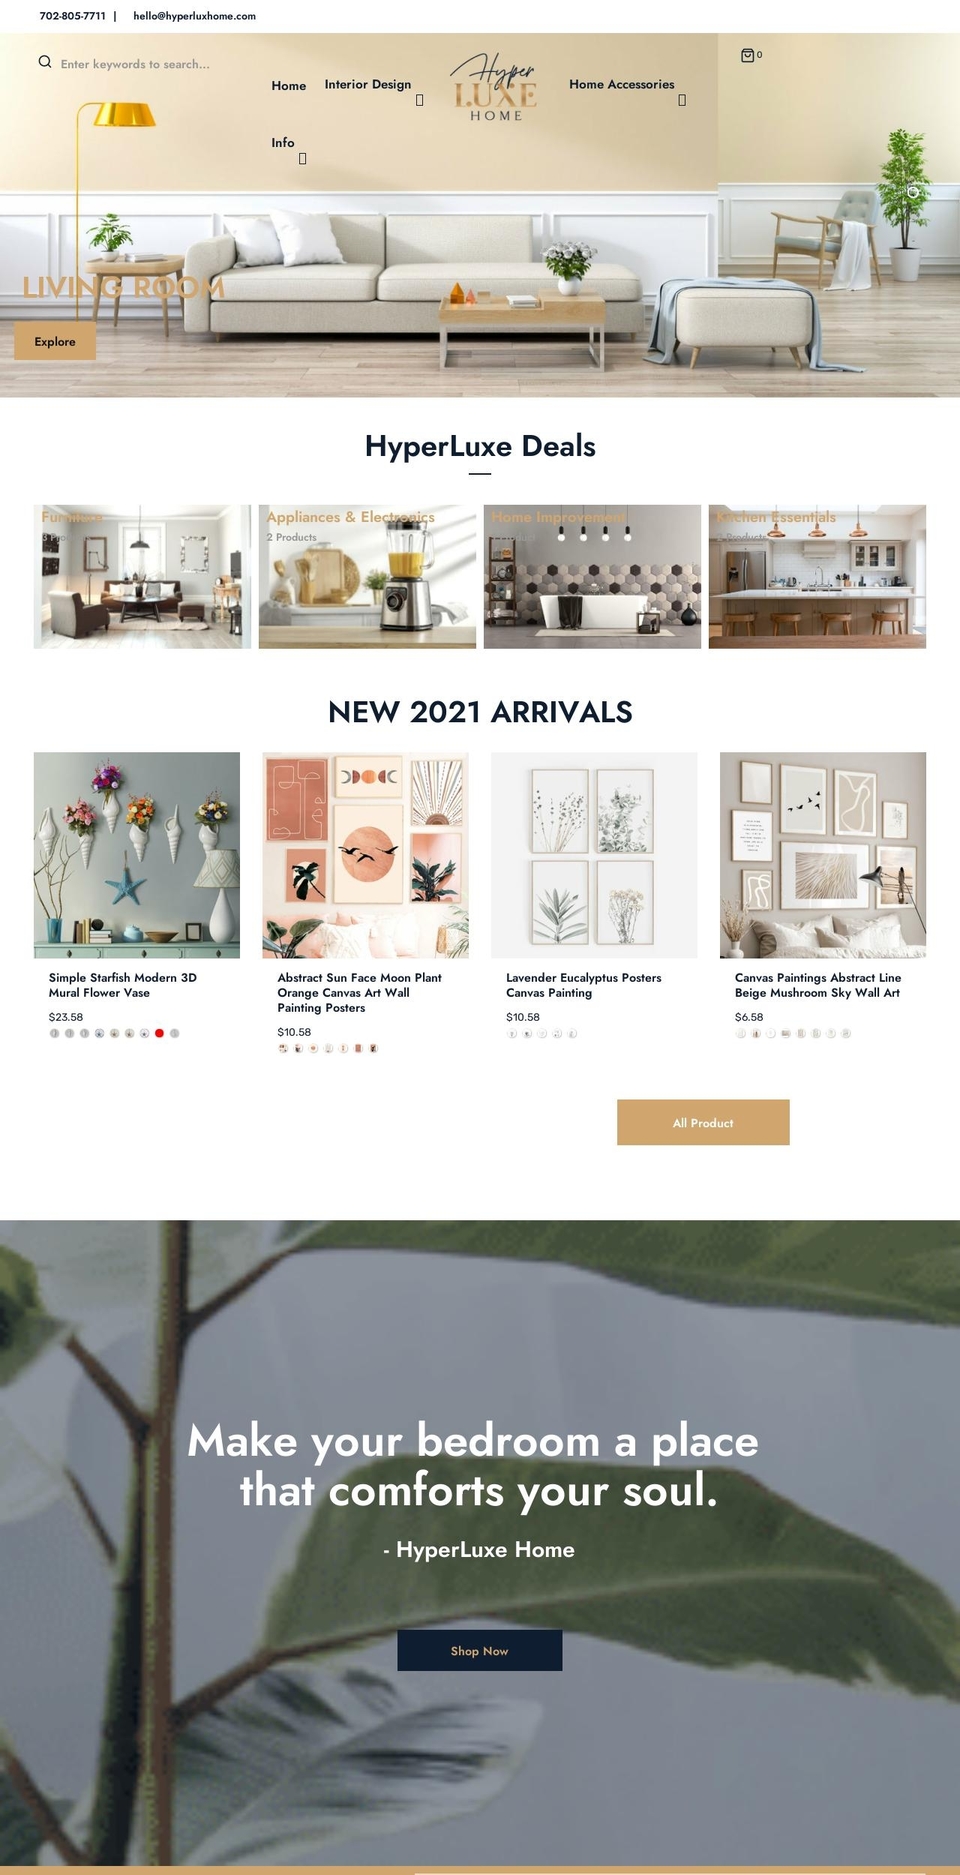 Home Shopify theme site example hyperluxehome.com